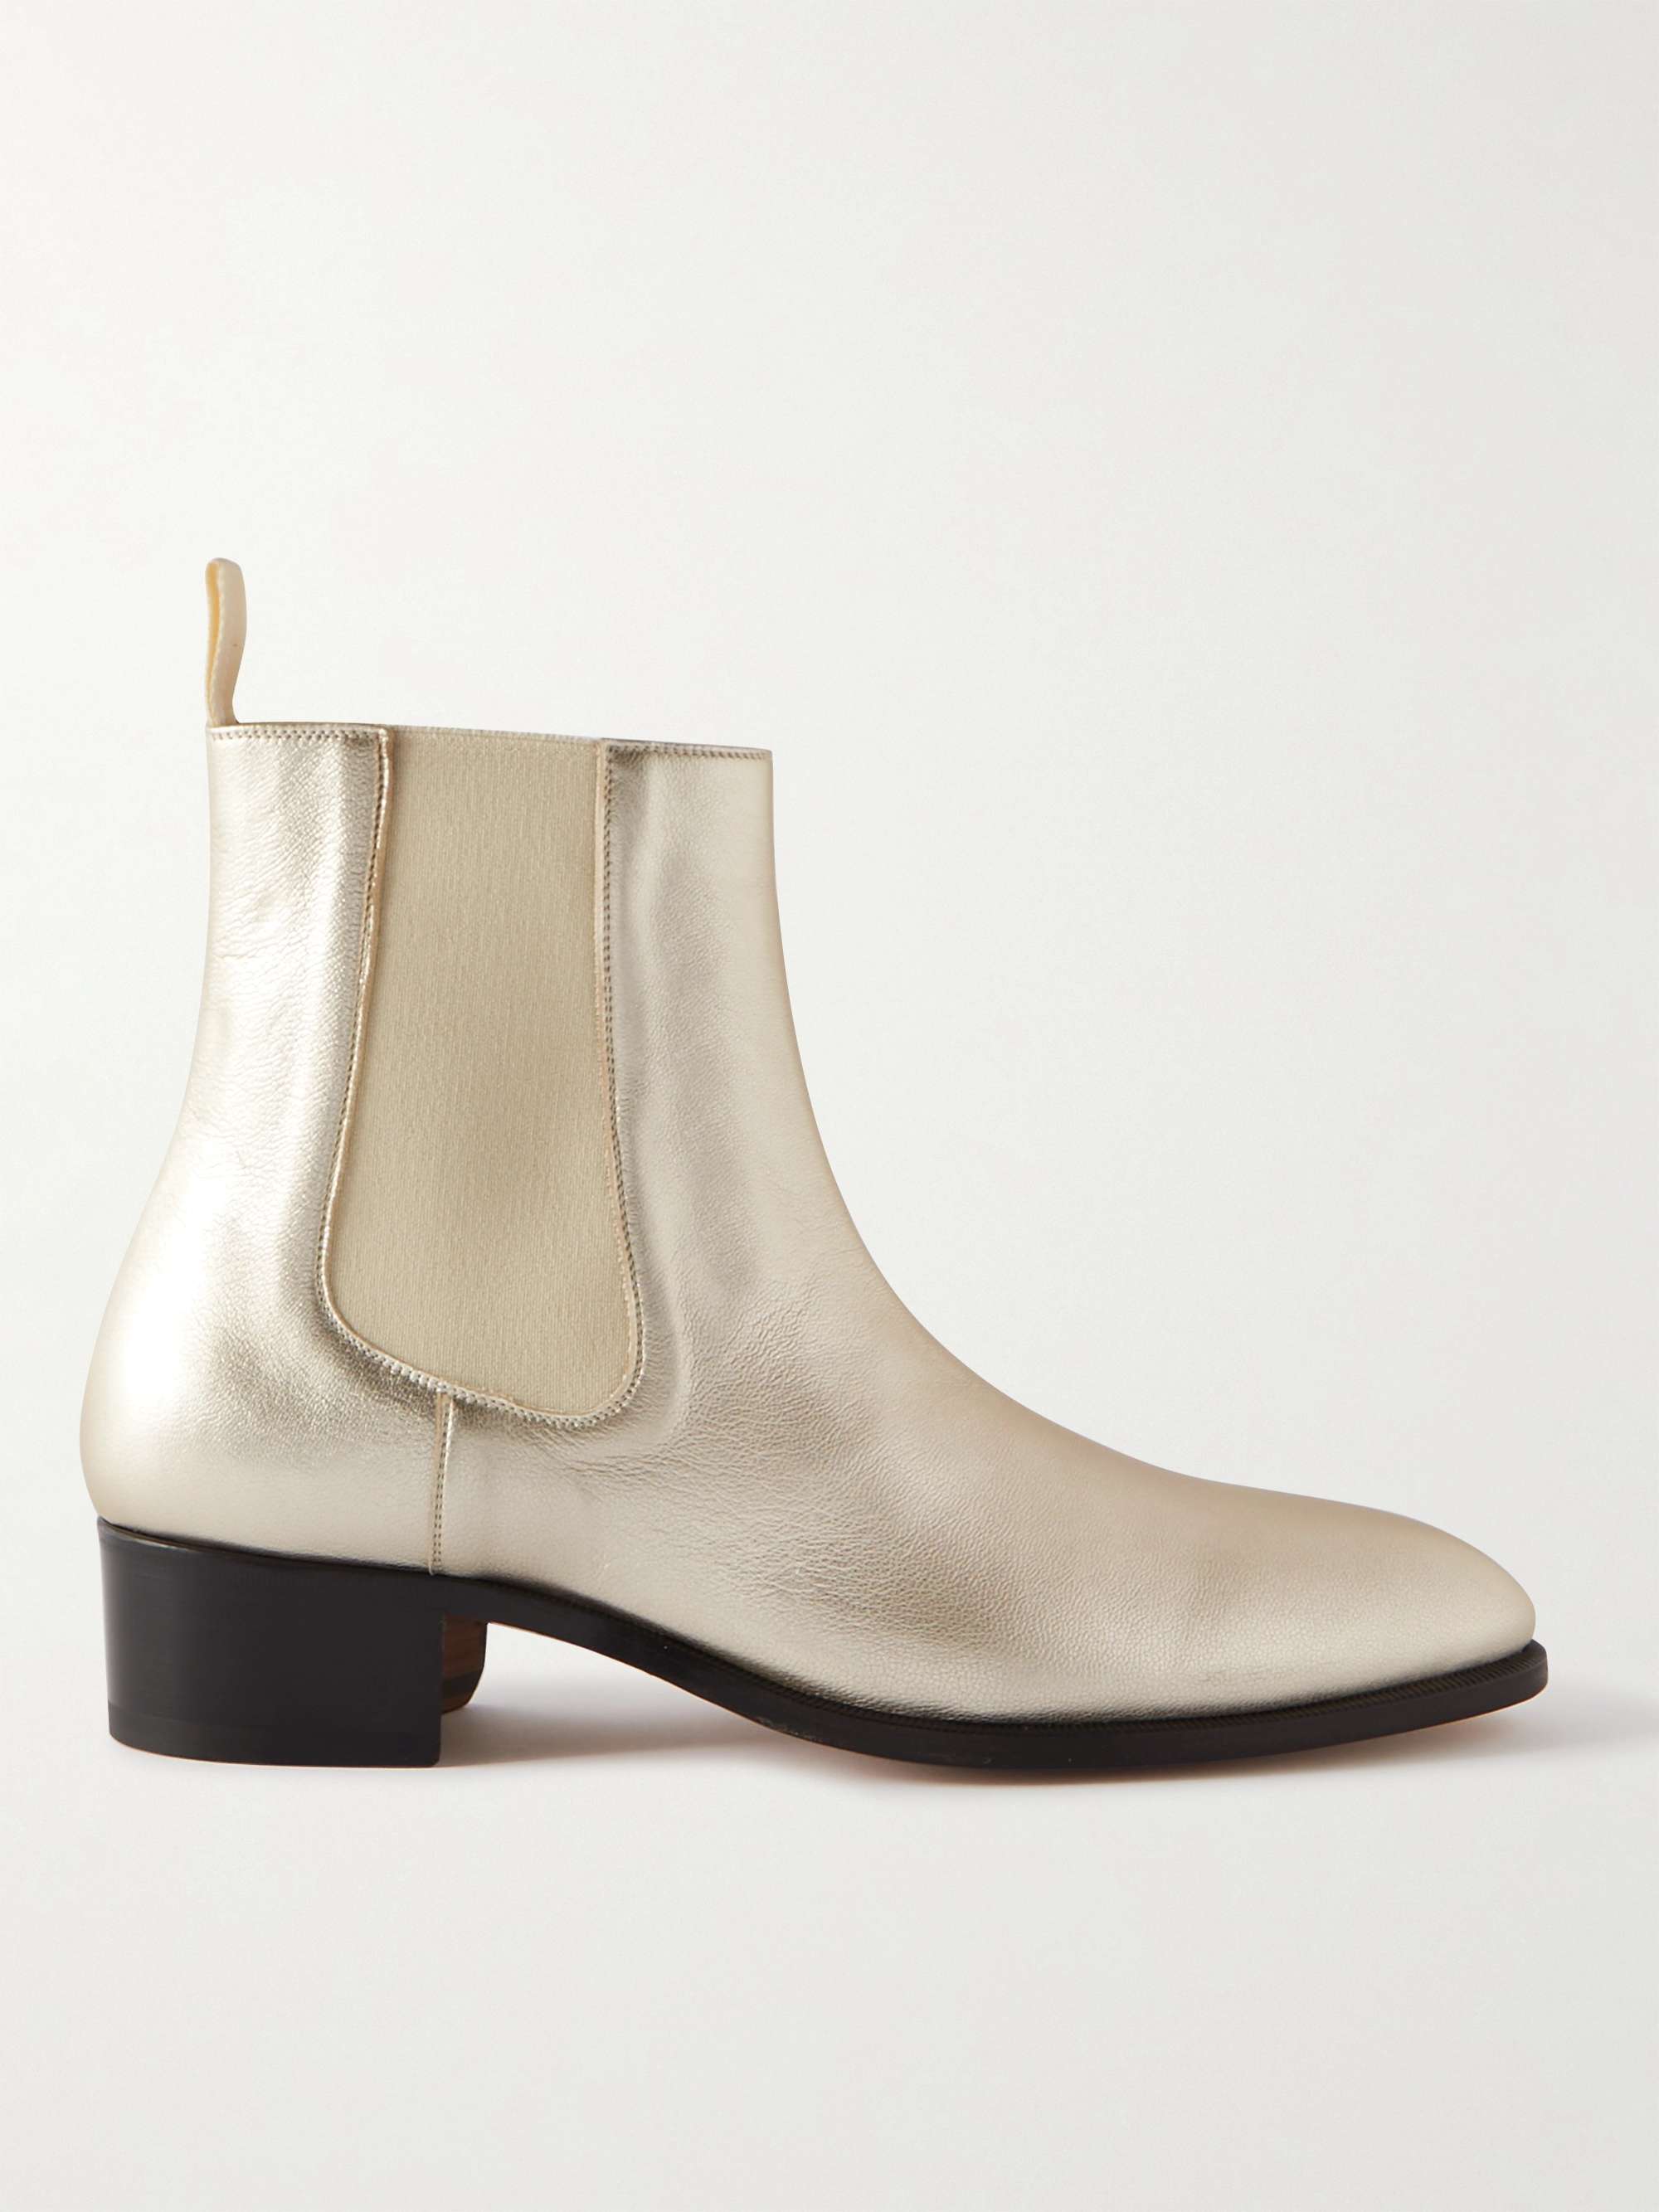 TOM FORD Metallic Leather Chelsea Boots